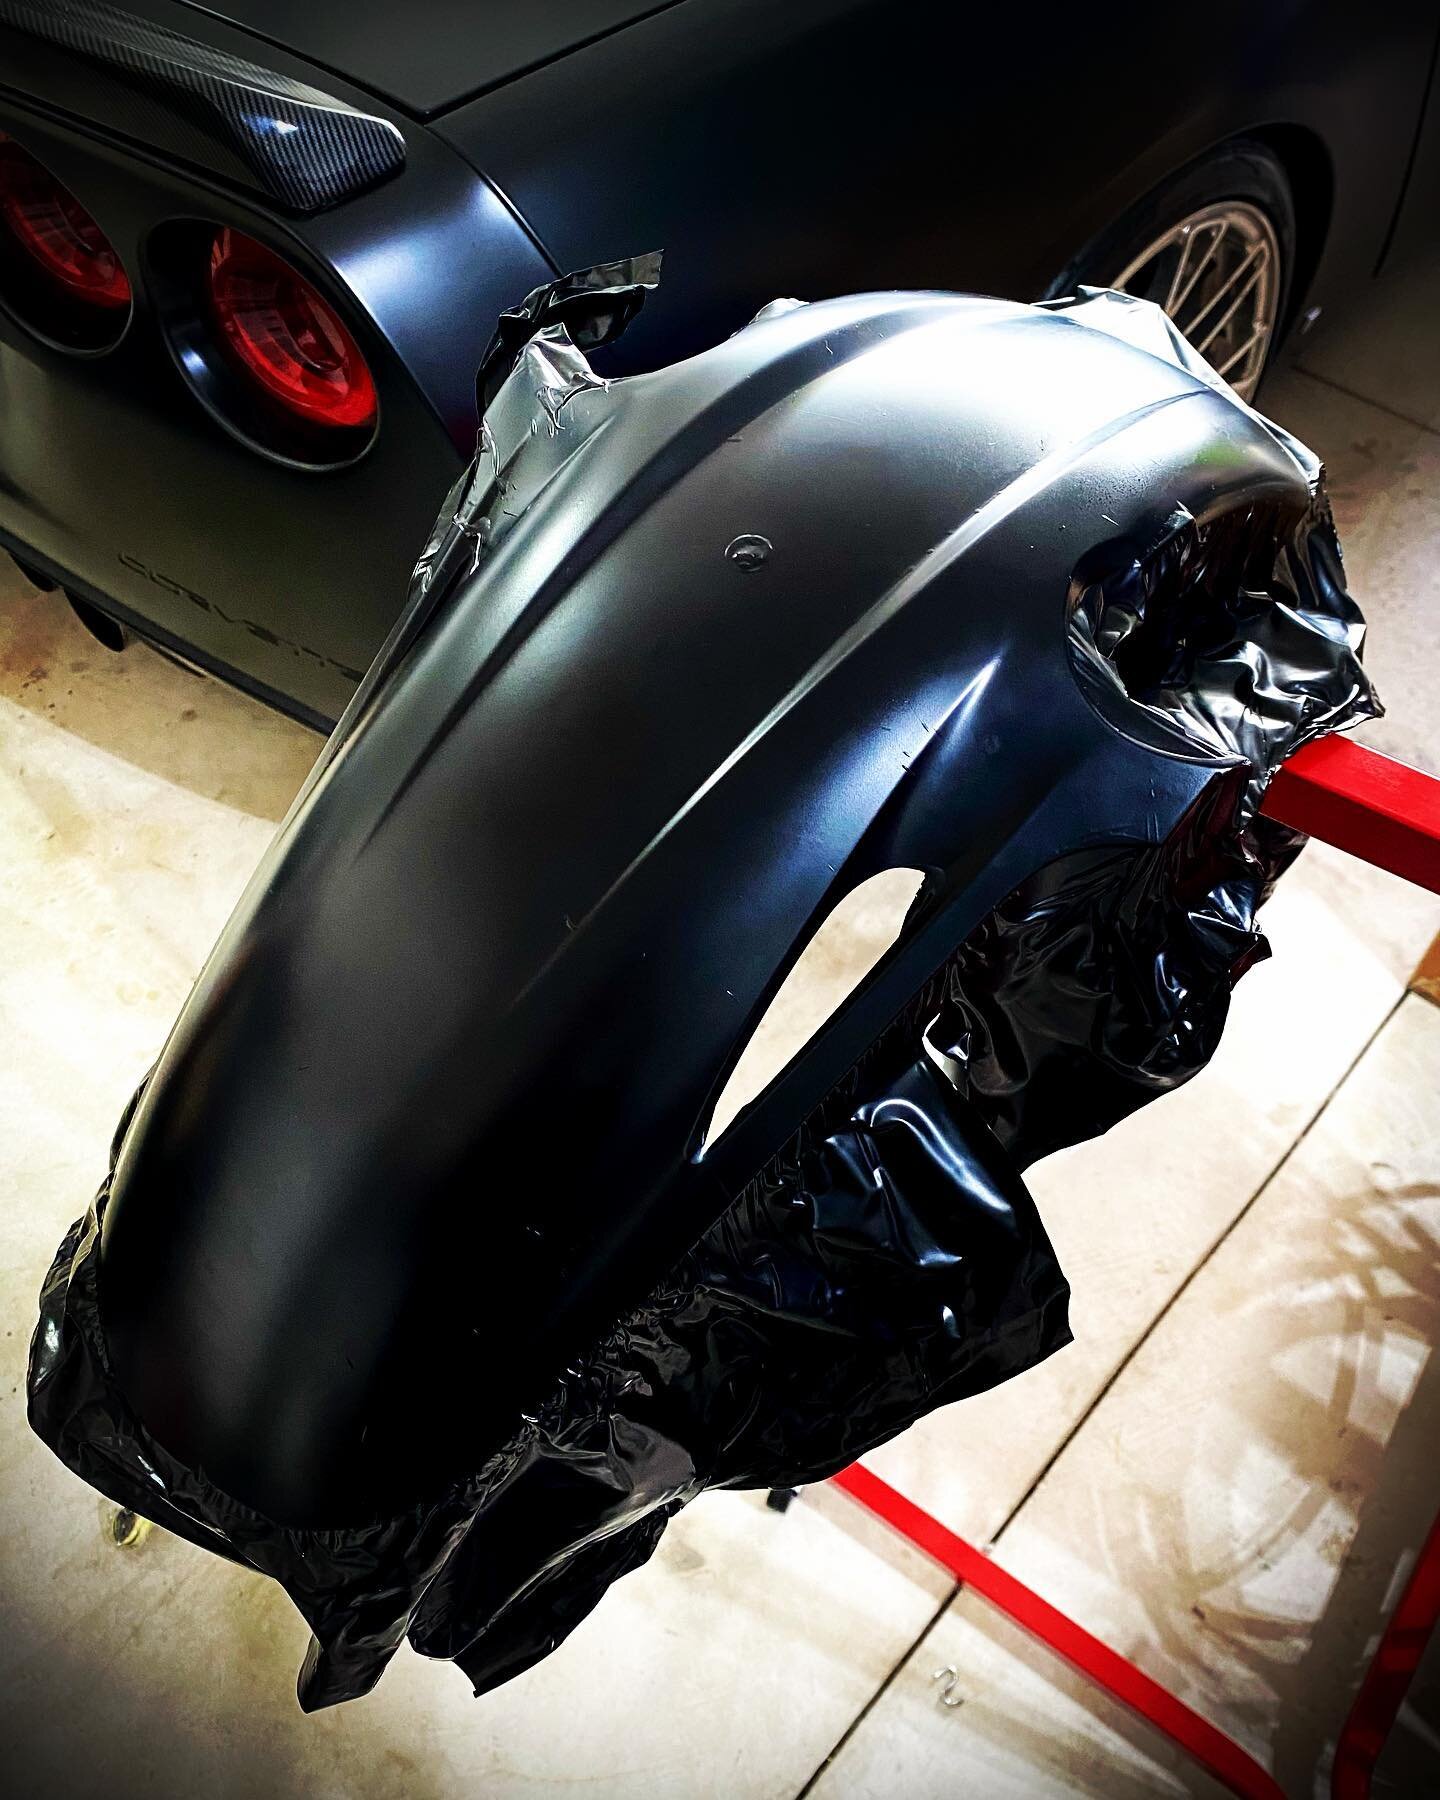 After a busy day of creating rings @saldivarsocial I started working on the Honda VFR800 fairings. Started with some Satin Black but the bike will have lots of inlays so stay tuned! ~When you want to &ldquo;ROCK WITH THE BEST&rdquo;, Saldivar Social 